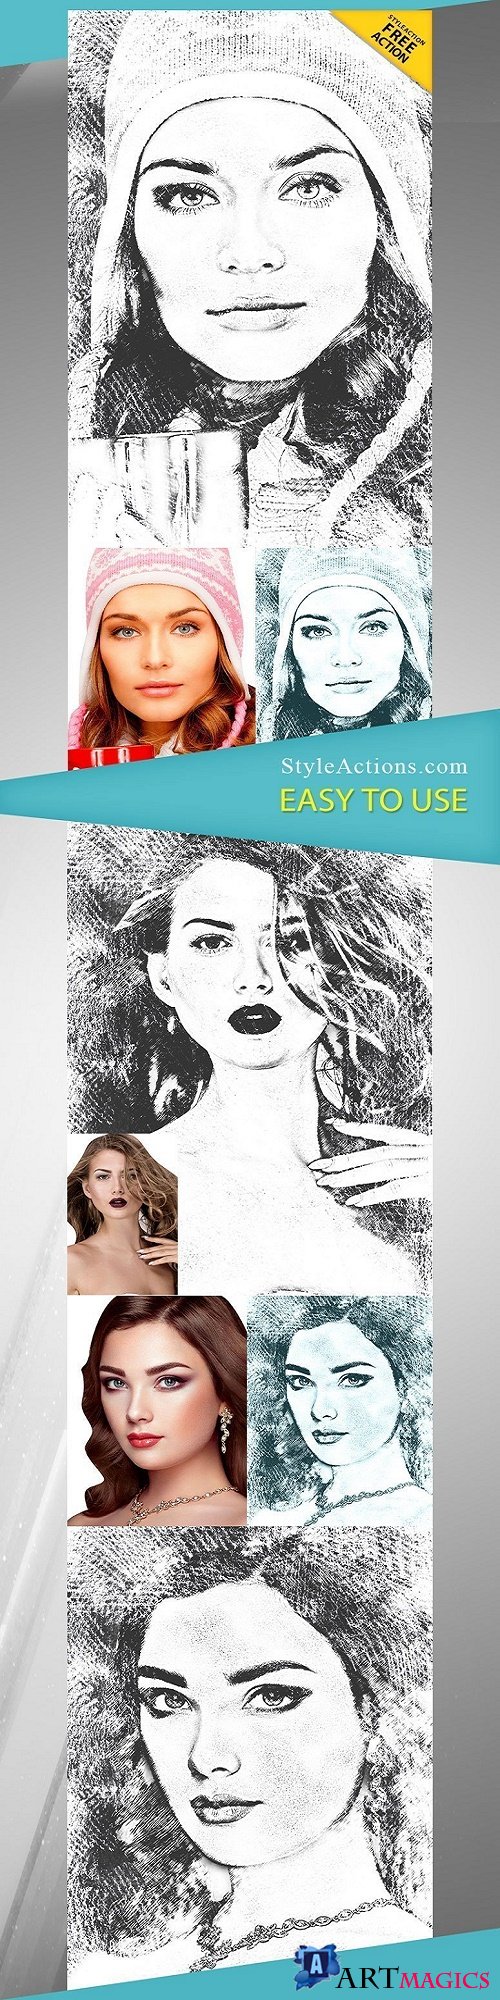 StyleActions - Pencil Sketch Photoshop Action